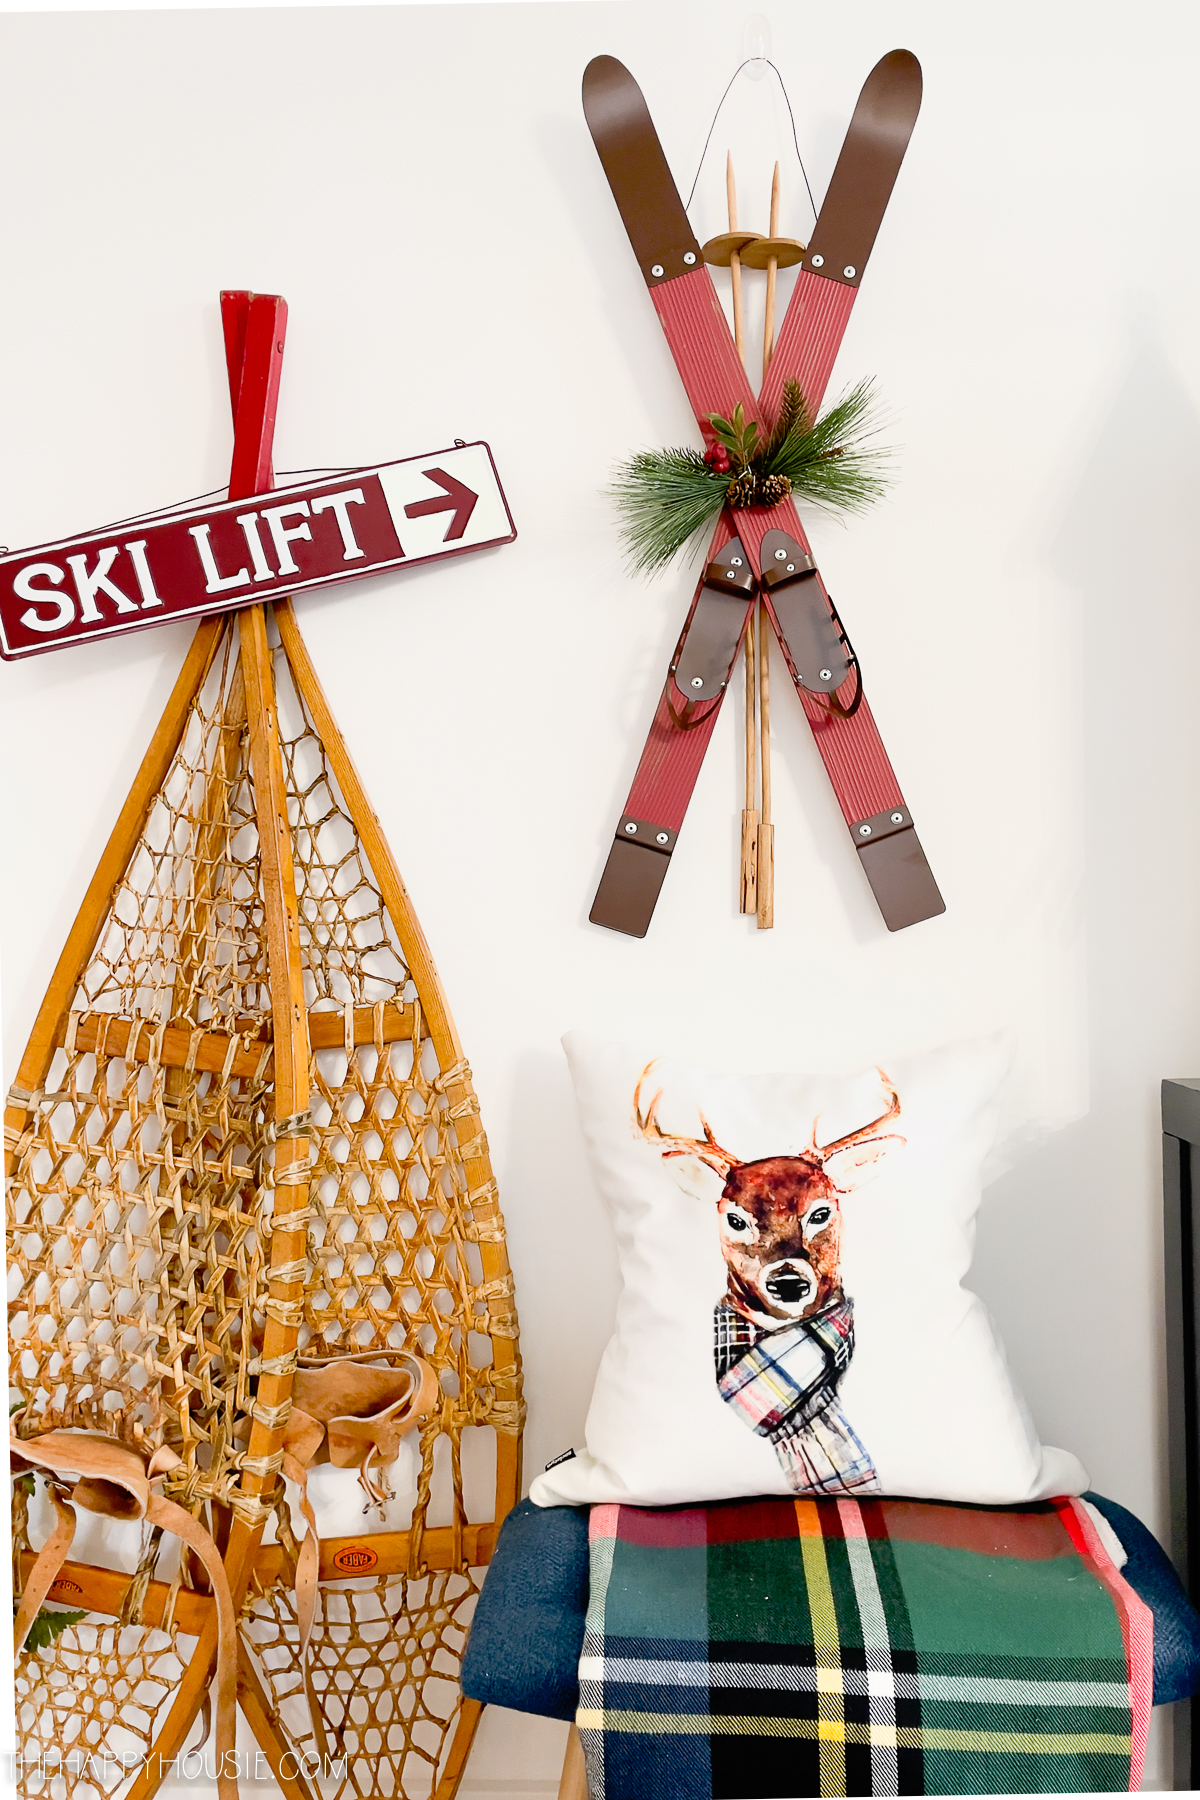 A snowshoe and skiis on the wall.